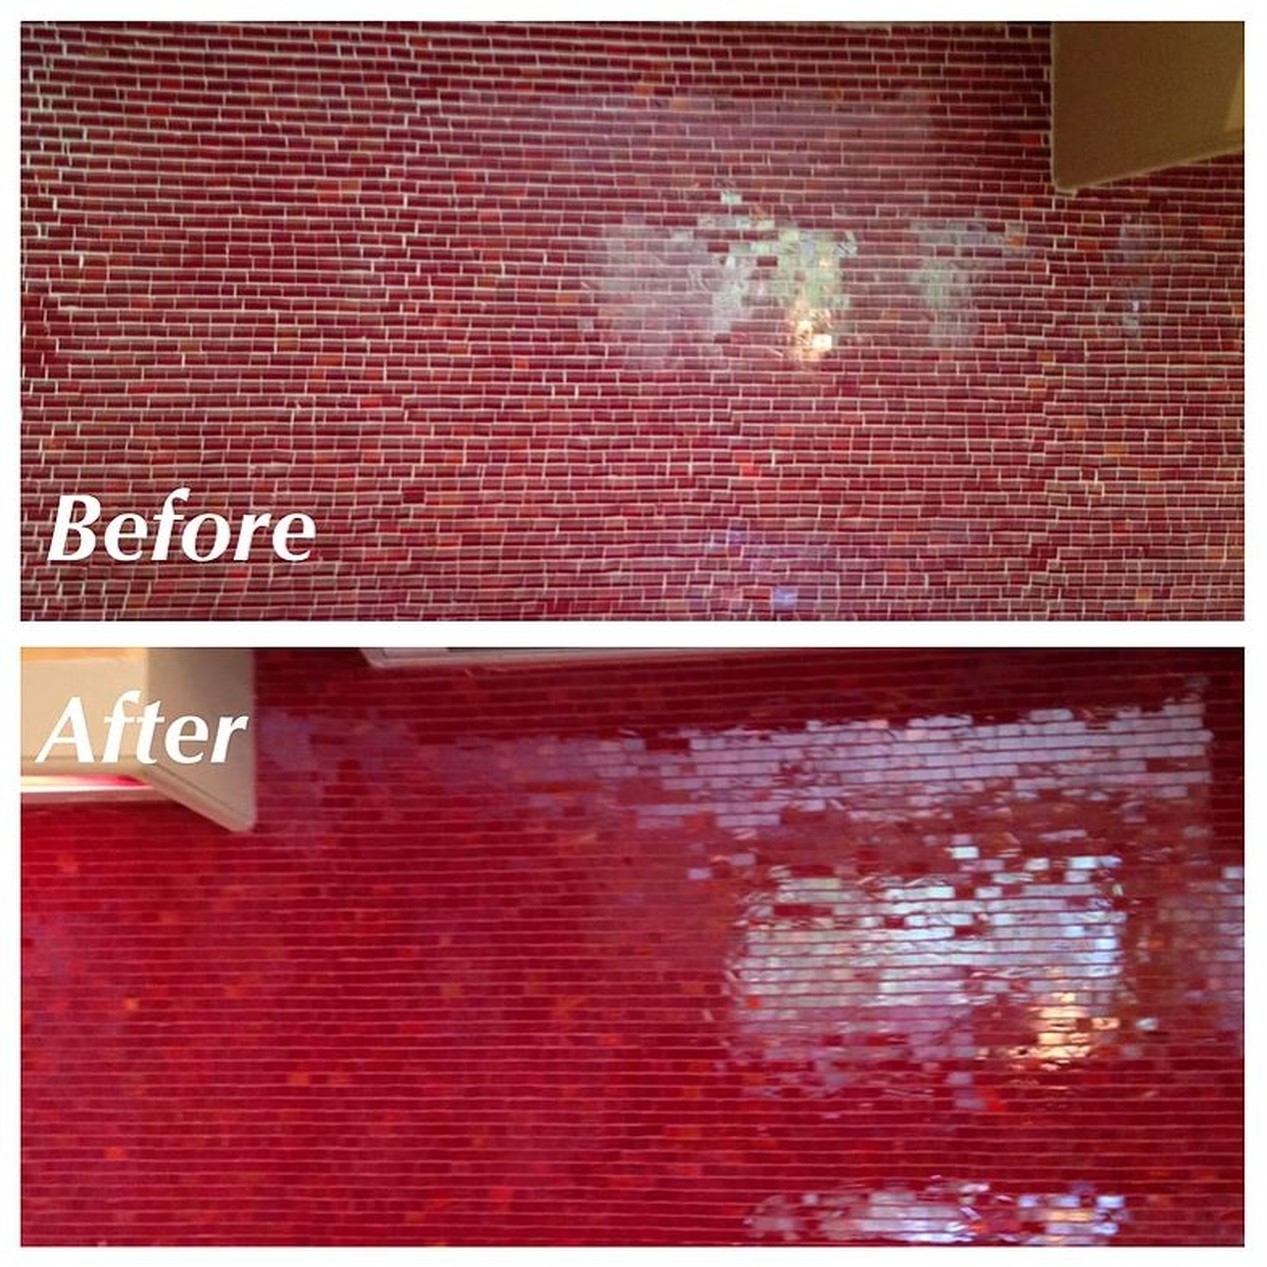 Grout Treatments - Before and After